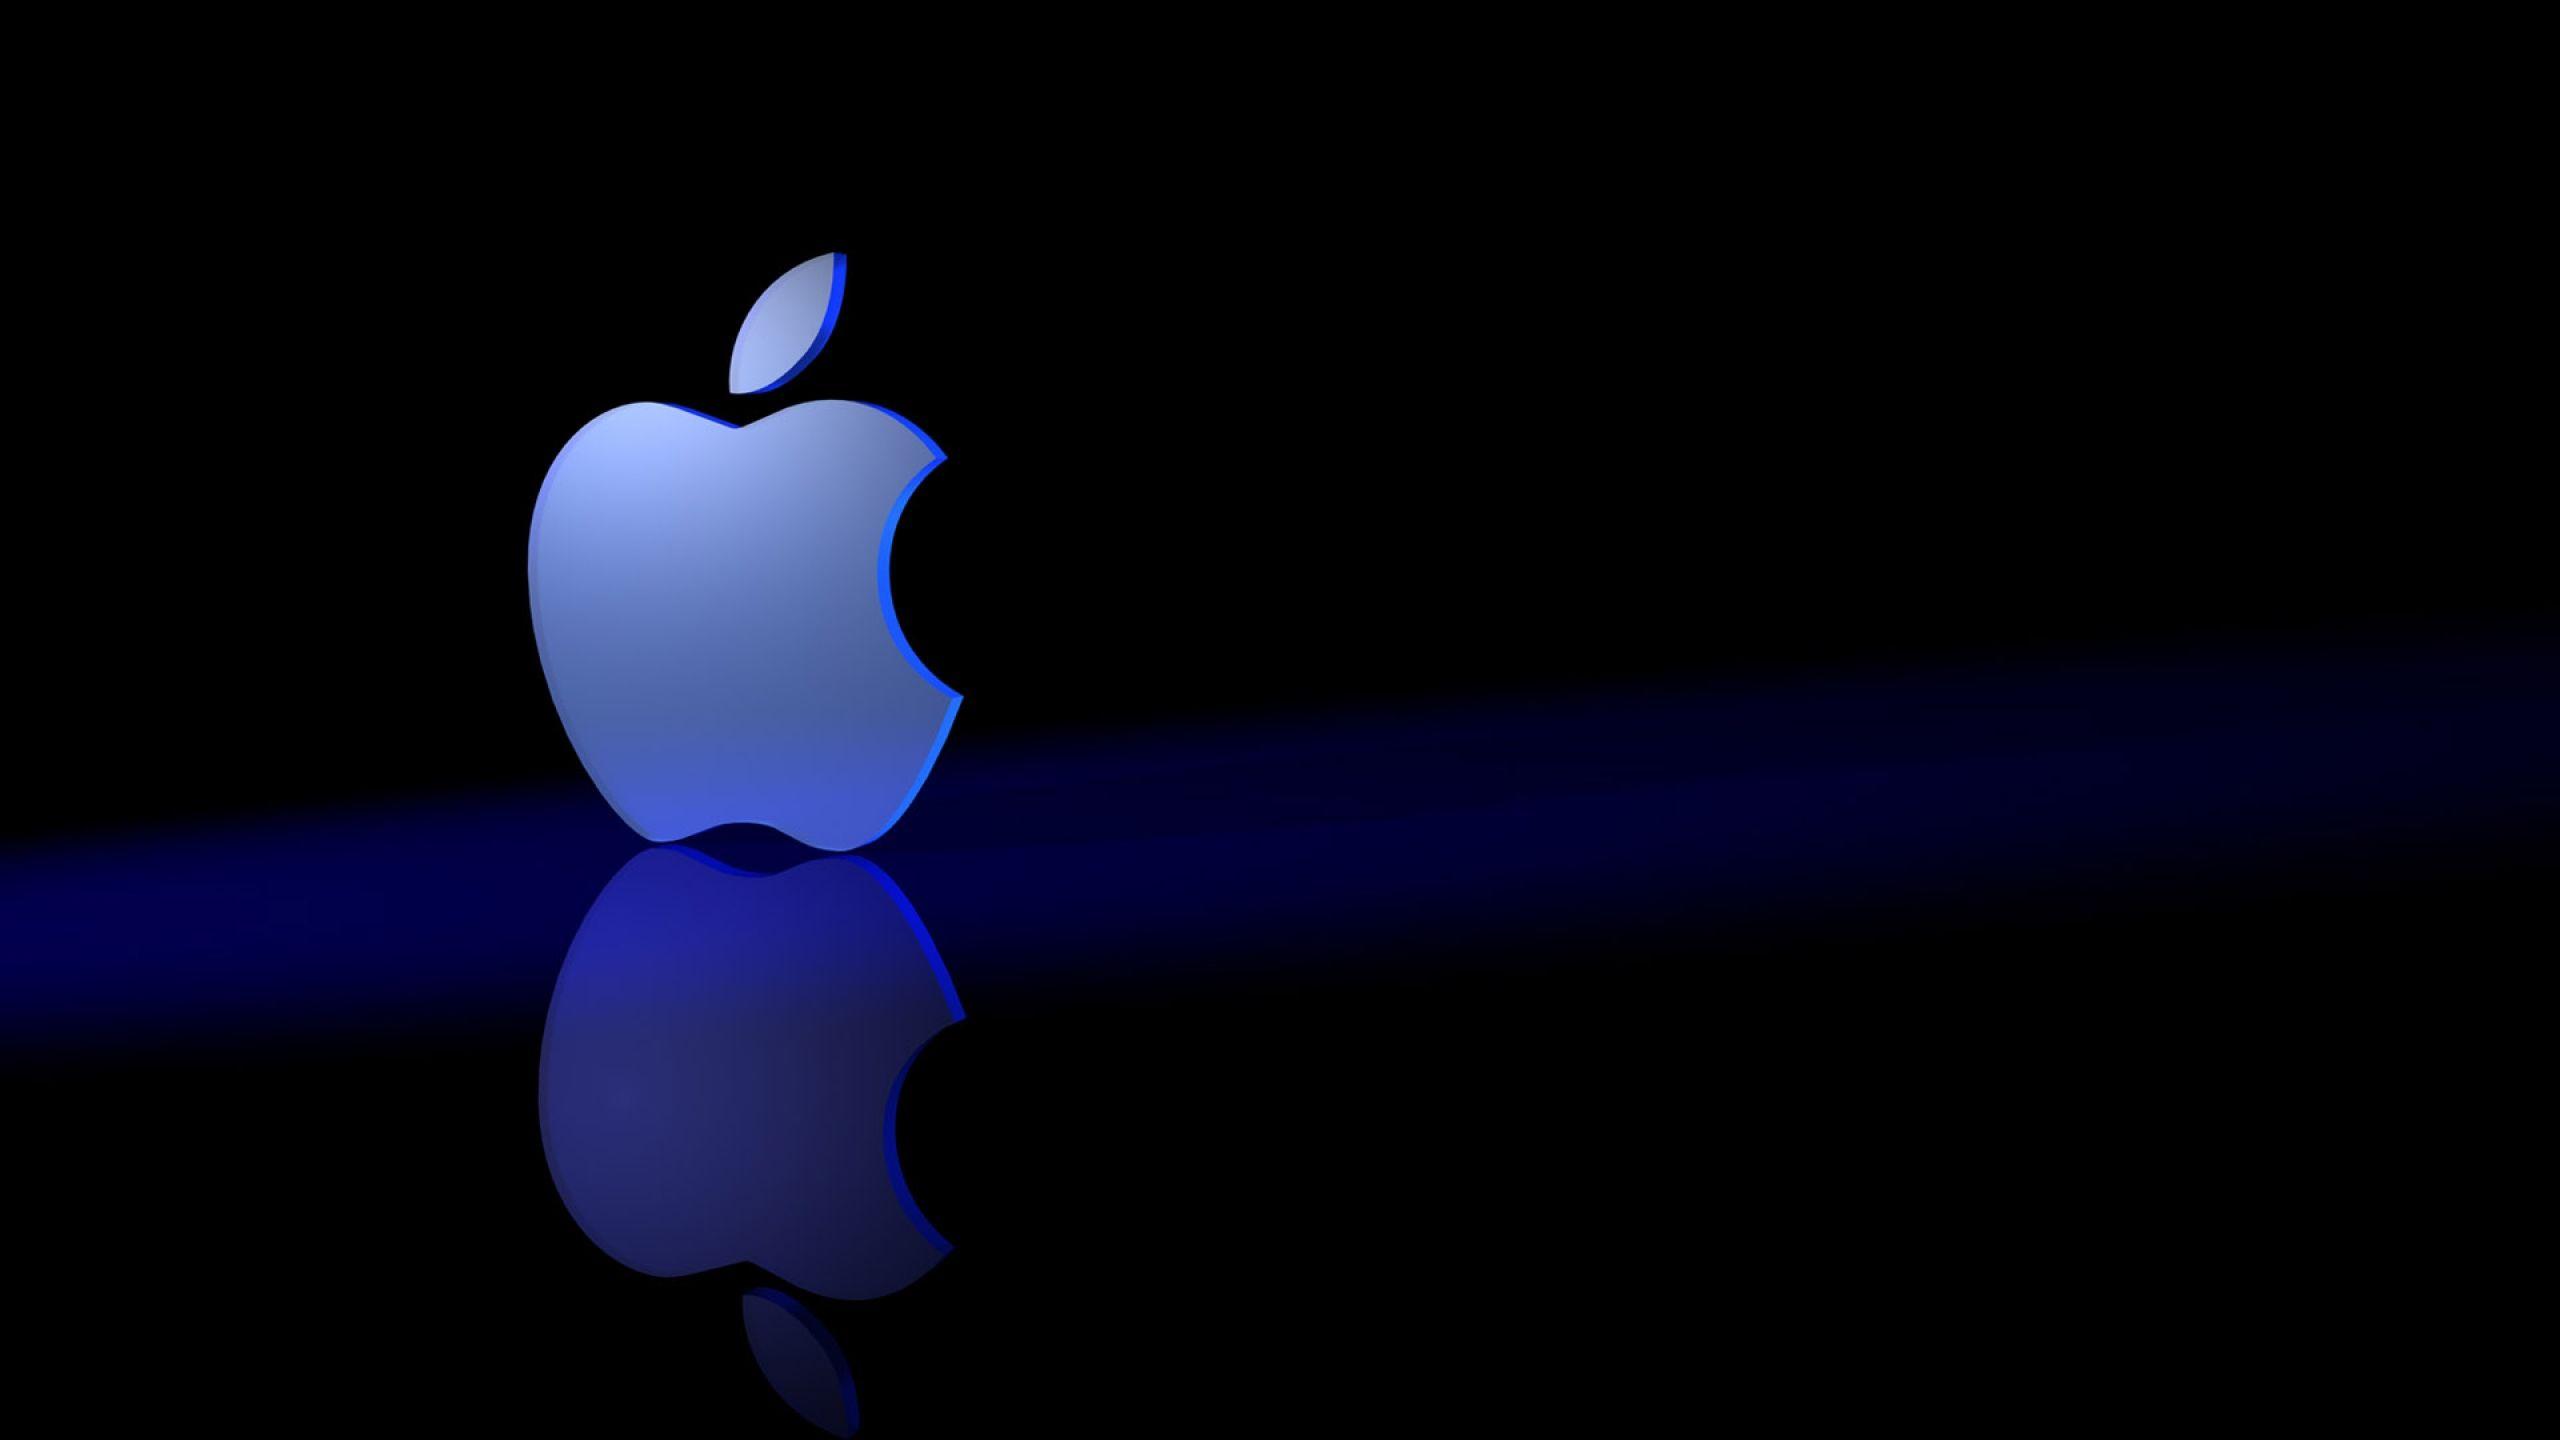 Apple Glass wallpaper for your iMac. HD Wallpaper Source